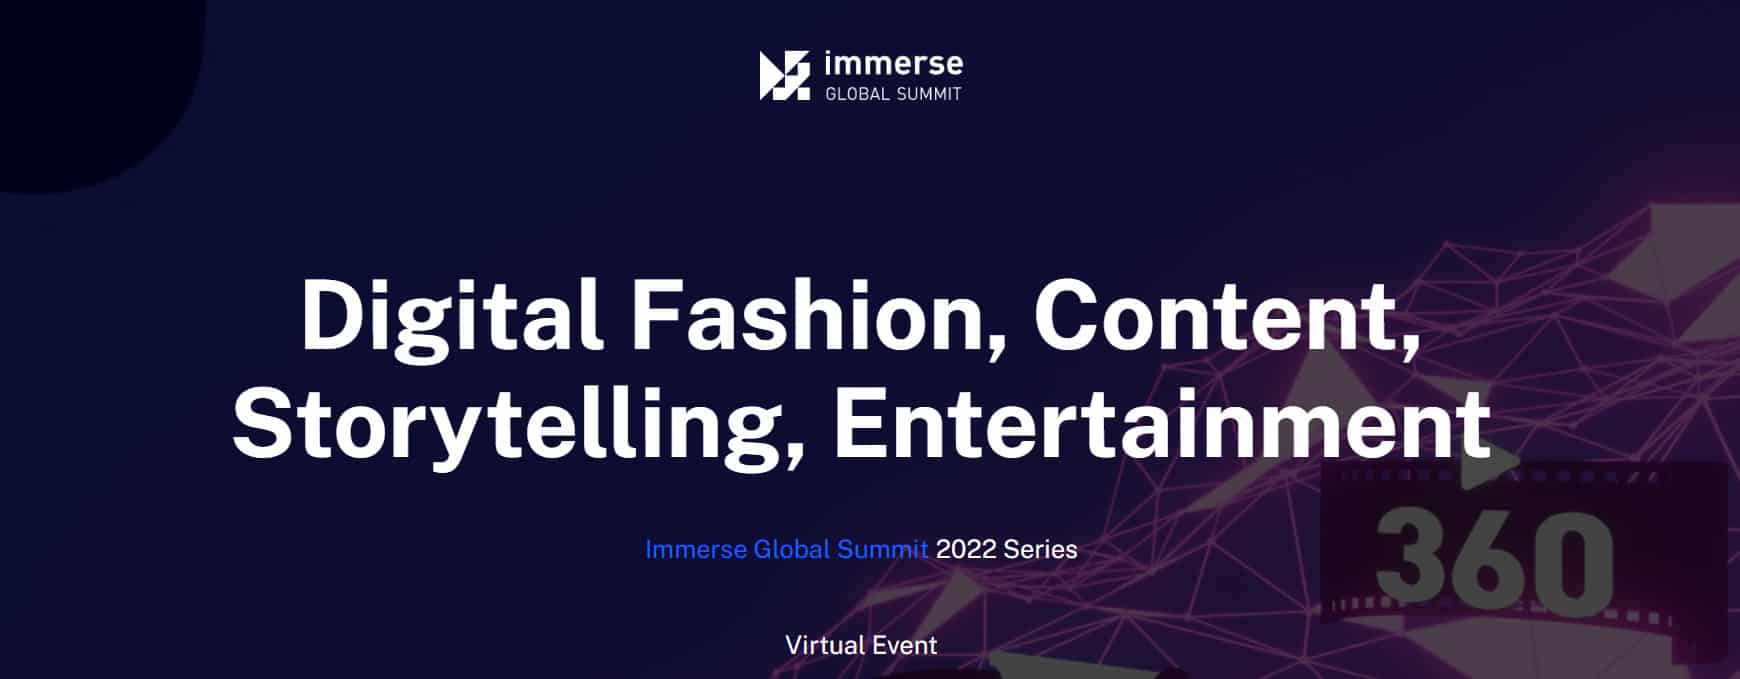 Immerse – Digital Fashion, Content, Storytelling, Entertainment